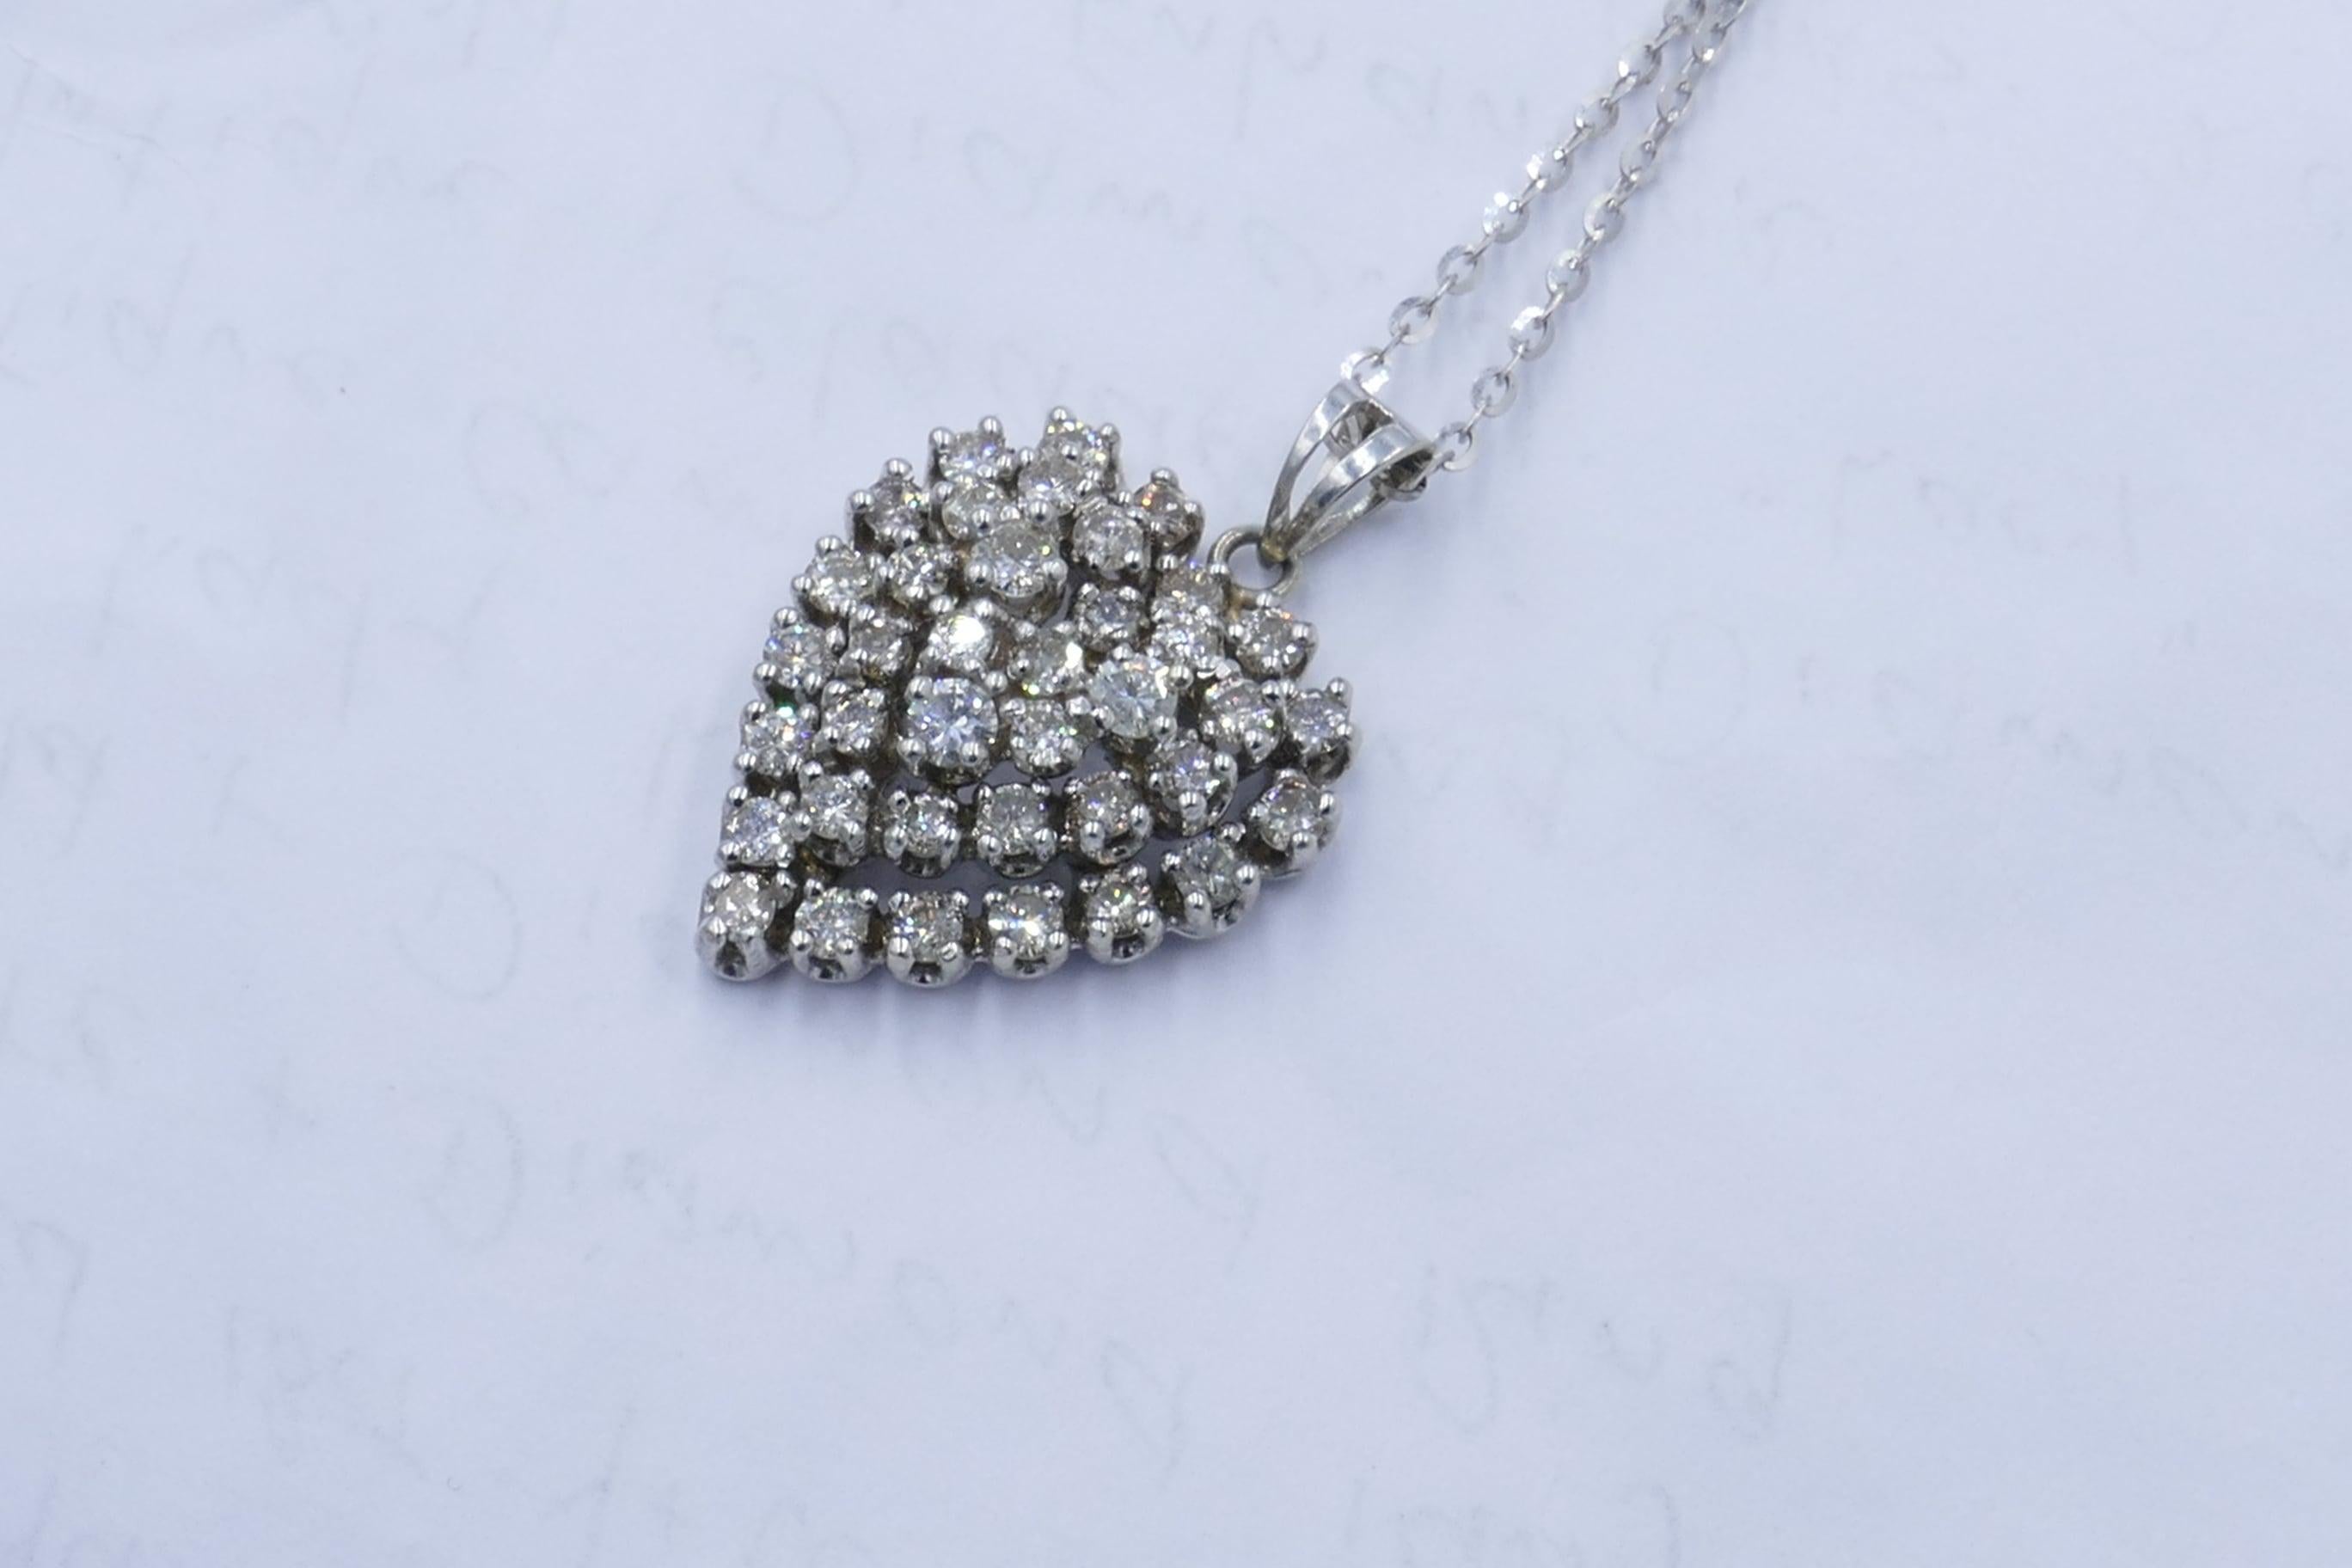  Beautiful Diamond Heart Pendant created in 18ct White Gold  & sitting on an 18 Carat White Gold Curb Link Chain.
The Pendant itself features 38 Round Brilliant Cut Diamonds 2.13 Carats in all, Colour G-L; Clarity SI1-I2; individually Claw Set.
The